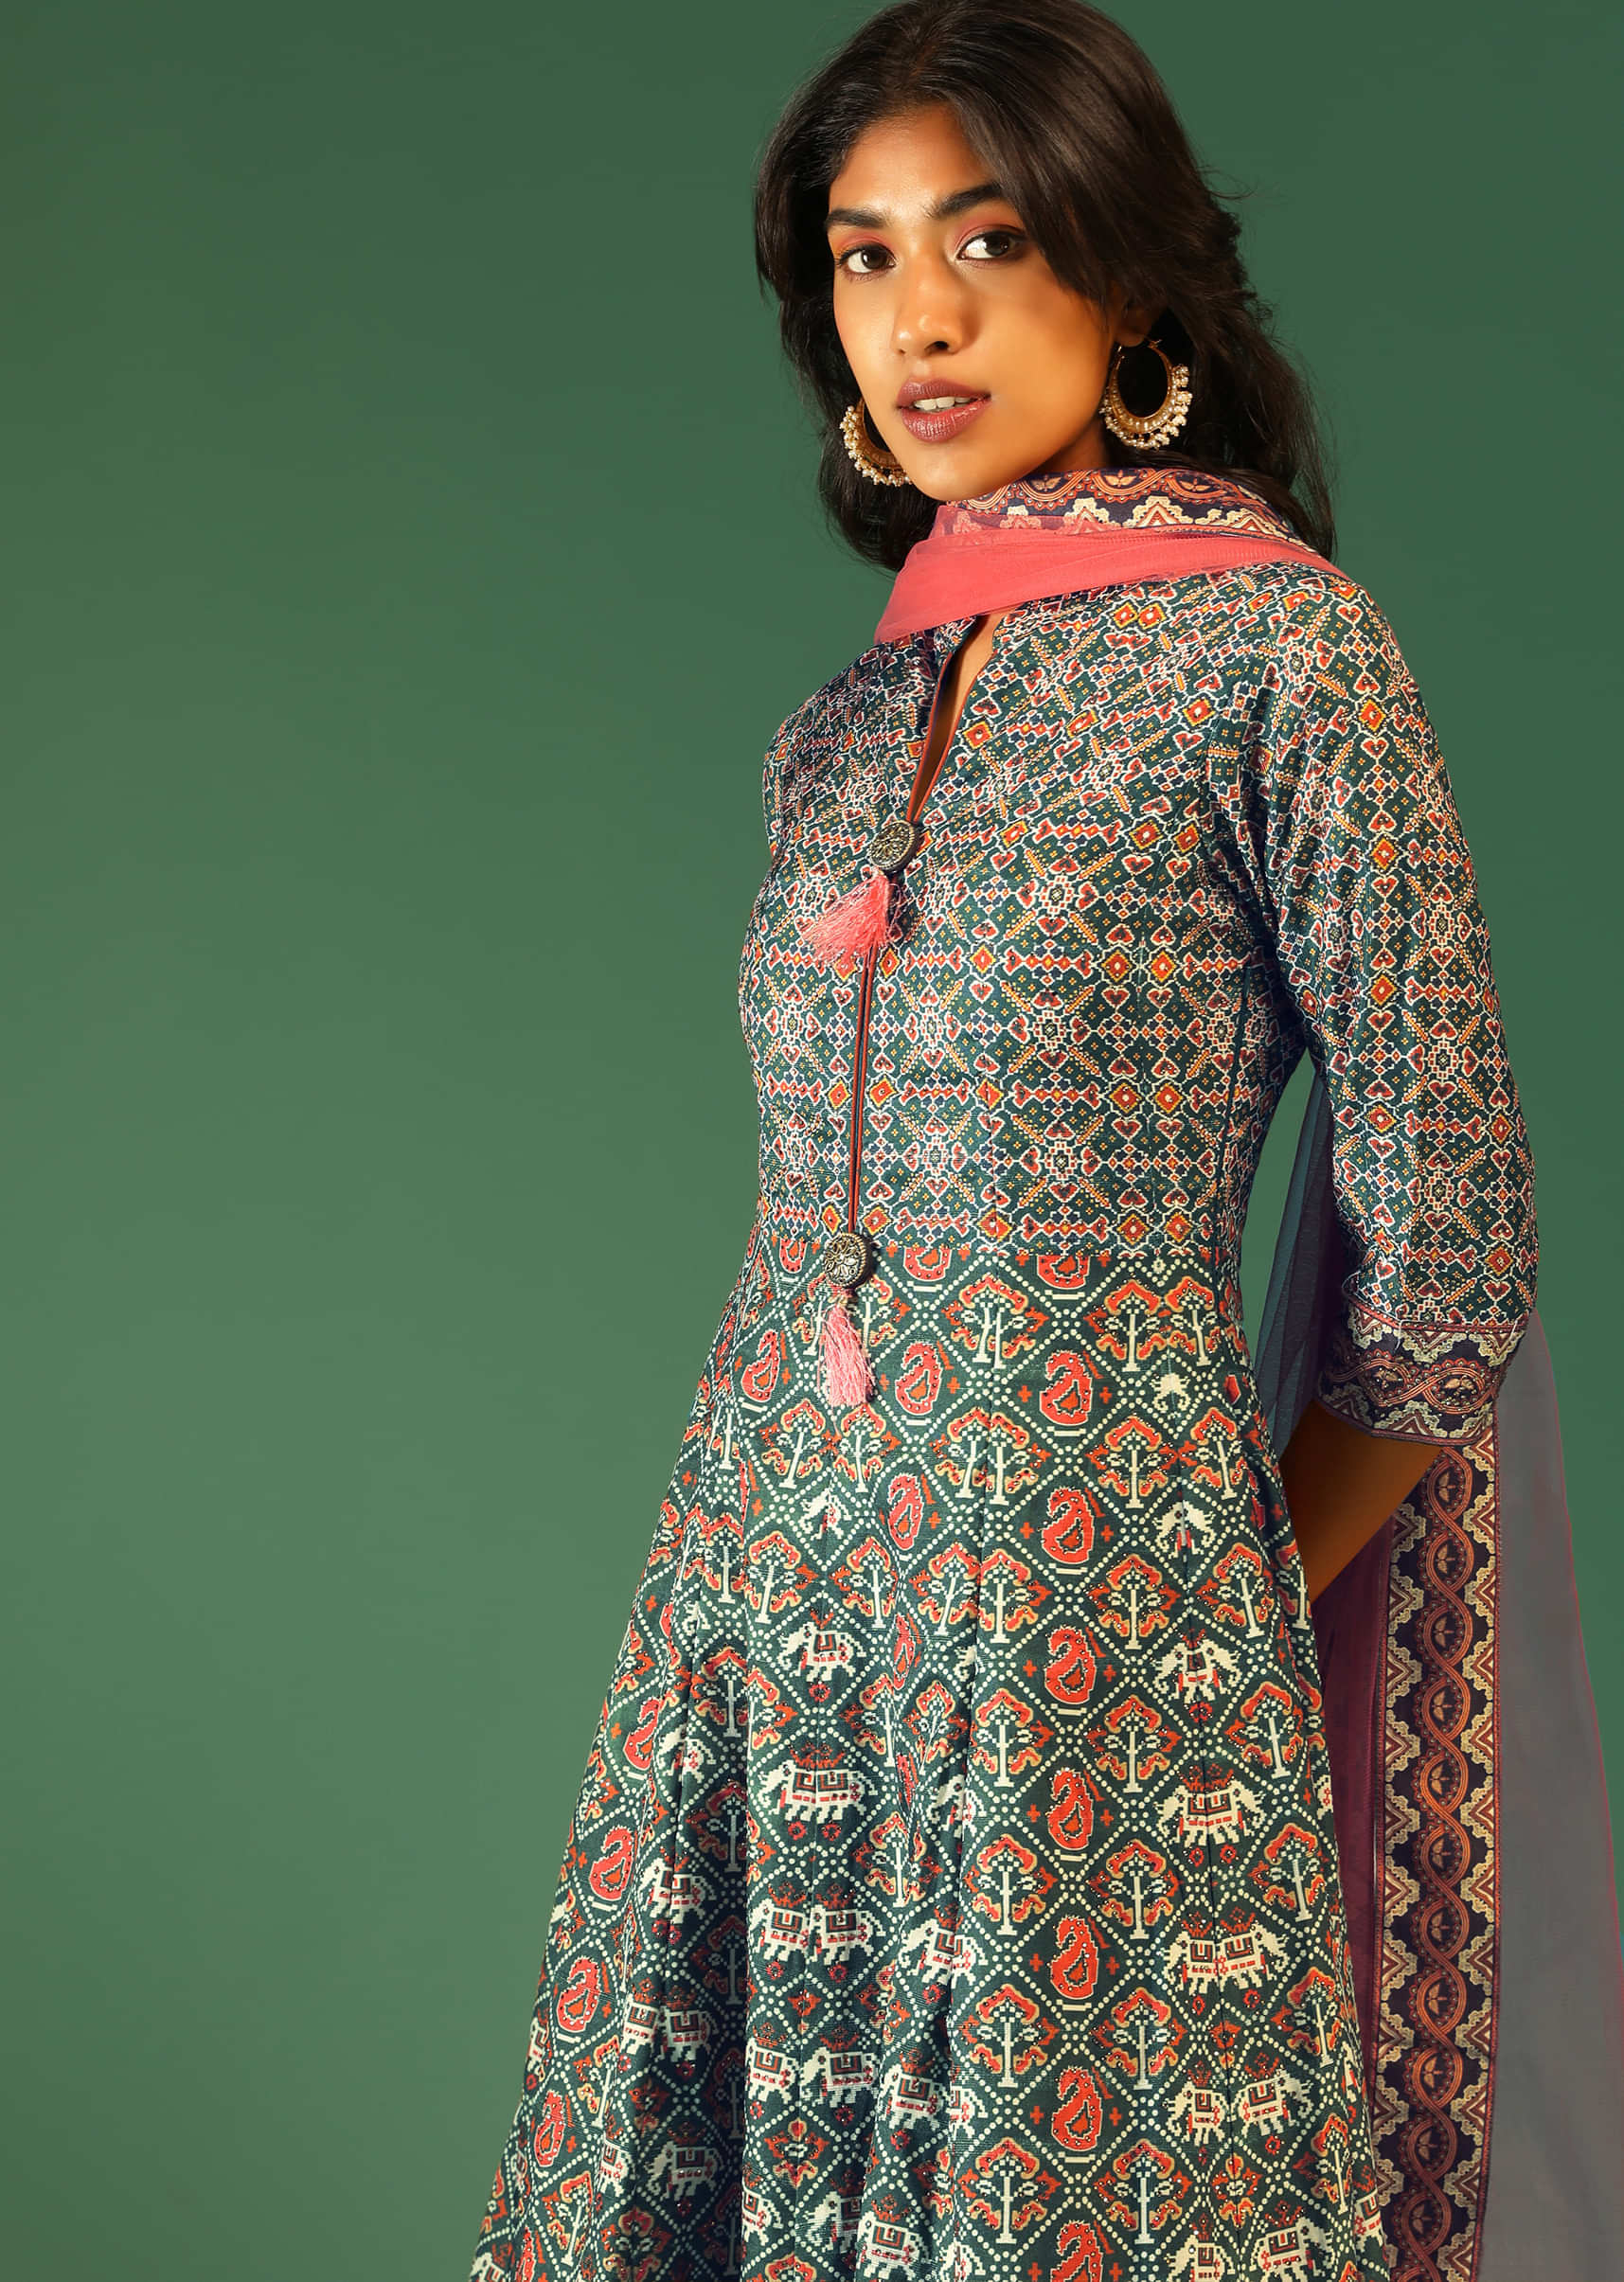 Hunter Green Anarkali Suit In Raw Silk With Patola Print And Kundan Detailing Along With A Pink Net Dupatta  